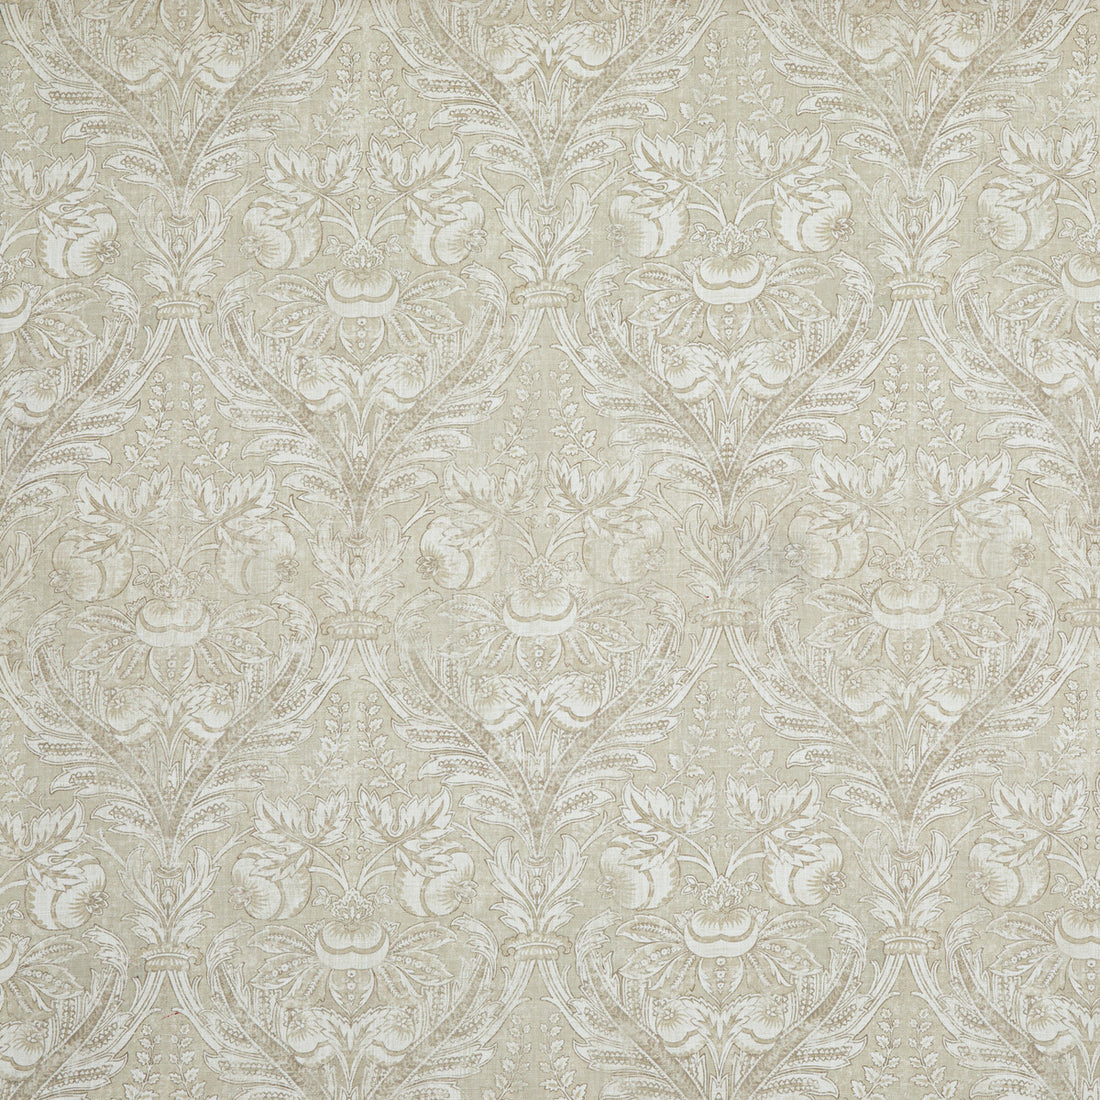 Lapura Damask fabric in dove color - pattern BP10828.3.0 - by G P &amp; J Baker in the Coromandel collection